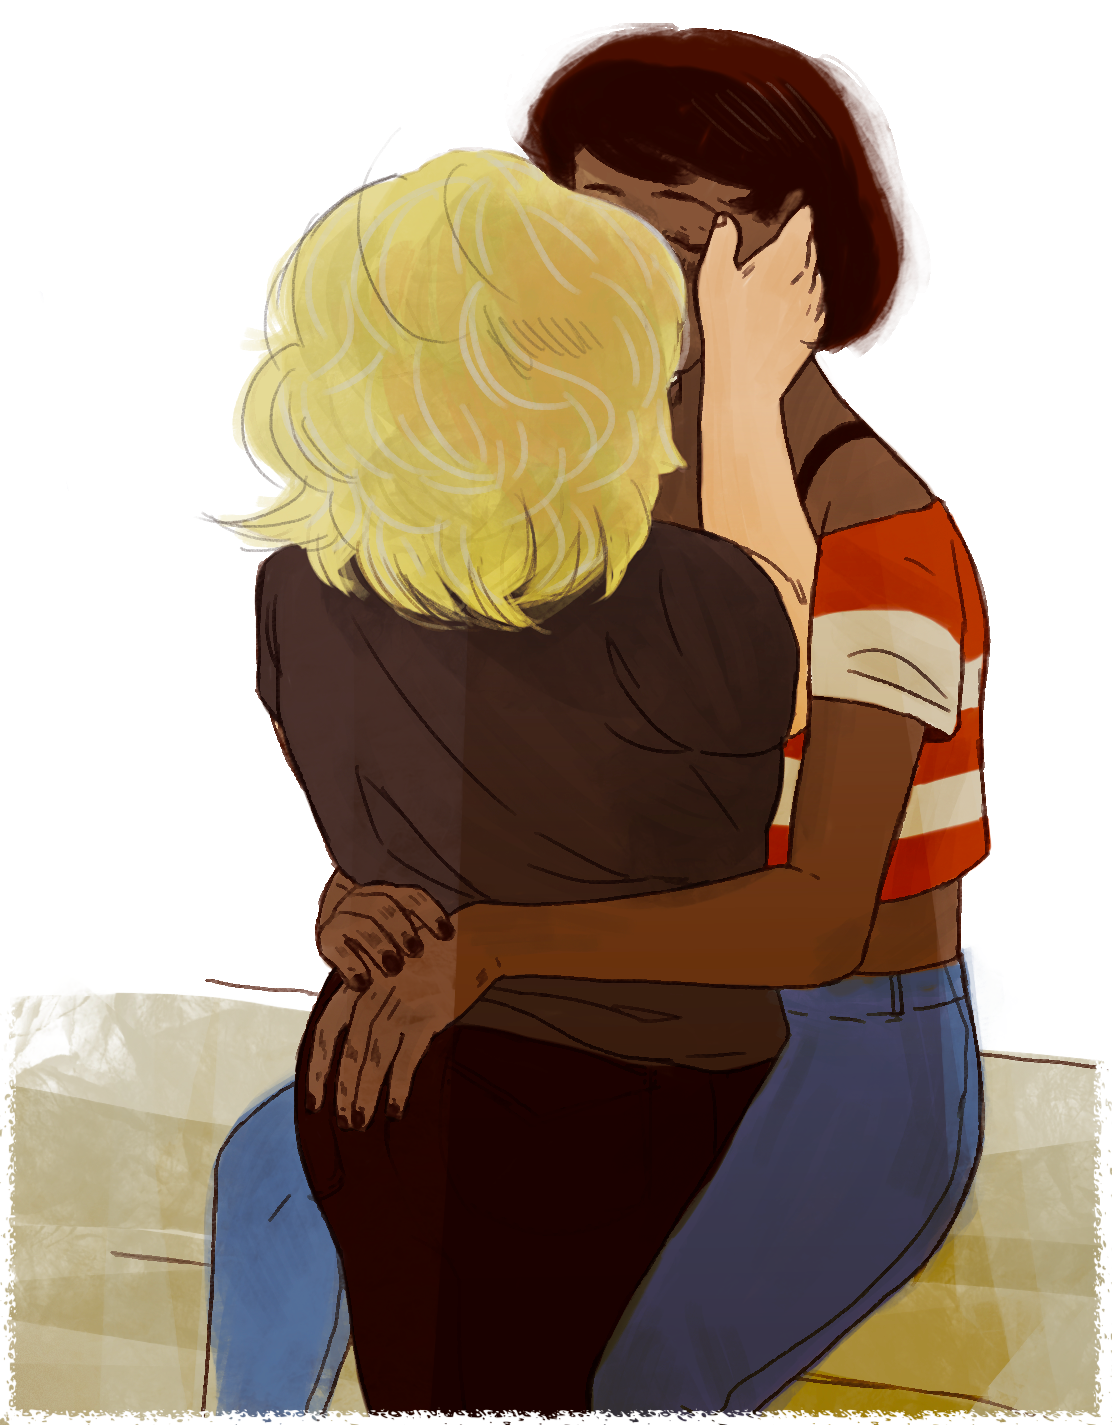 it has come to my attention that Sadie blushed when Jenny hugged her